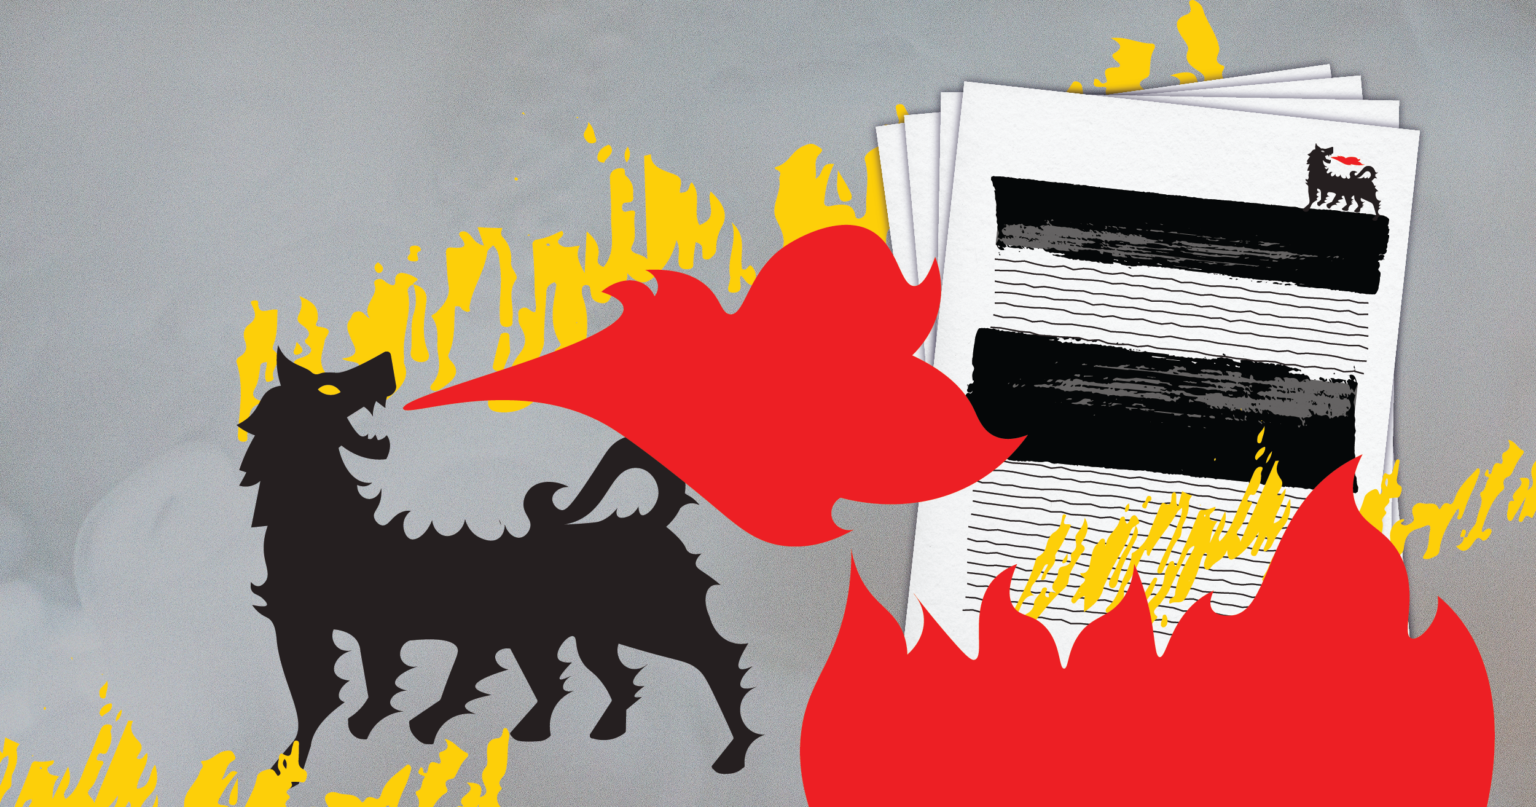 Drawing of the Eni fire-breathing dragon logo setting fire to a legal document.